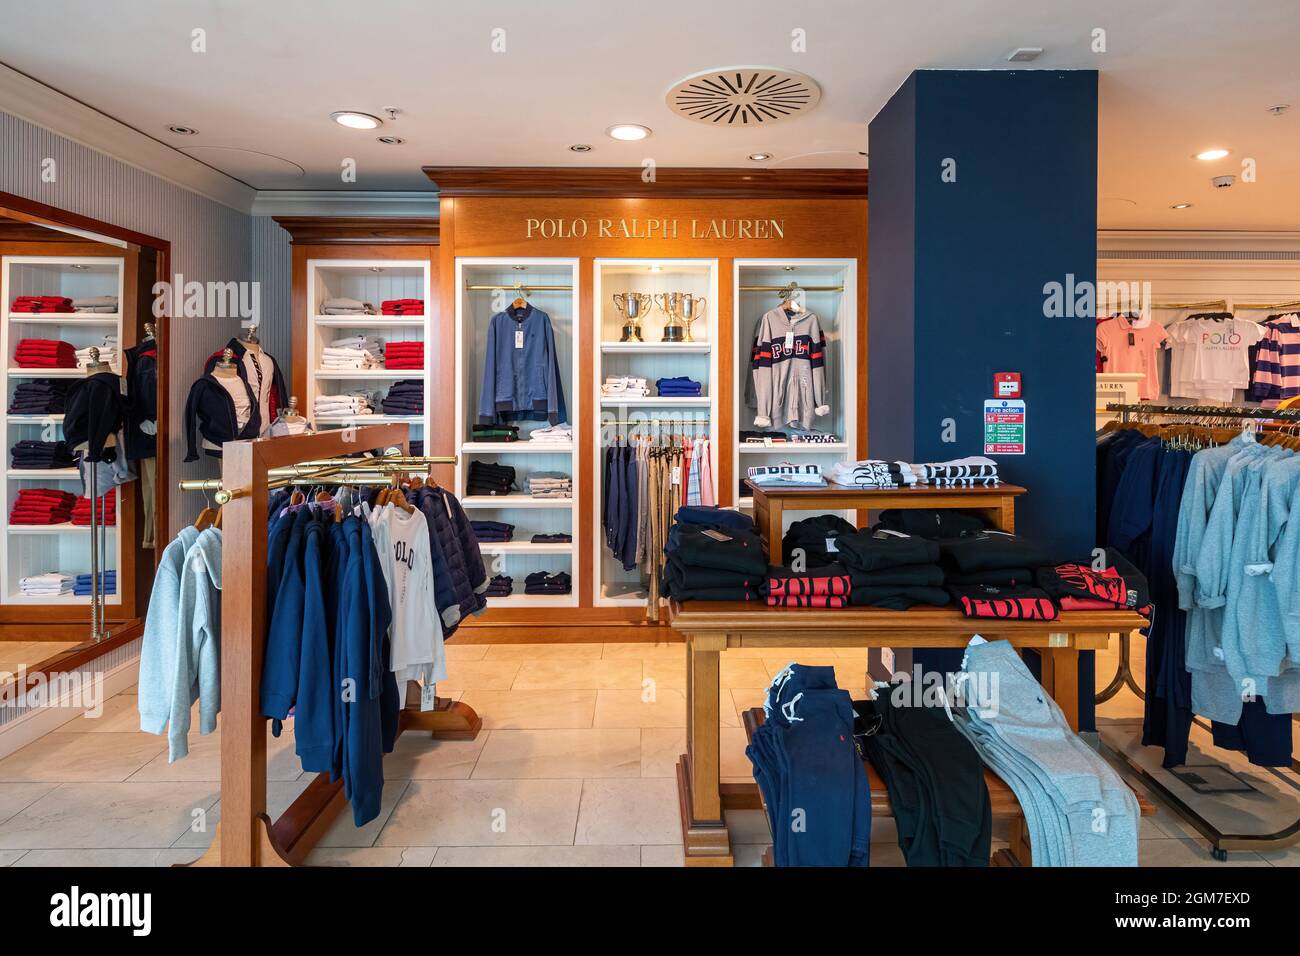 Interior of House of Fraser Department Store in Guildford, Surrey, England,  UK. Polo Ralph Lauren range of clothing on display Stock Photo - Alamy